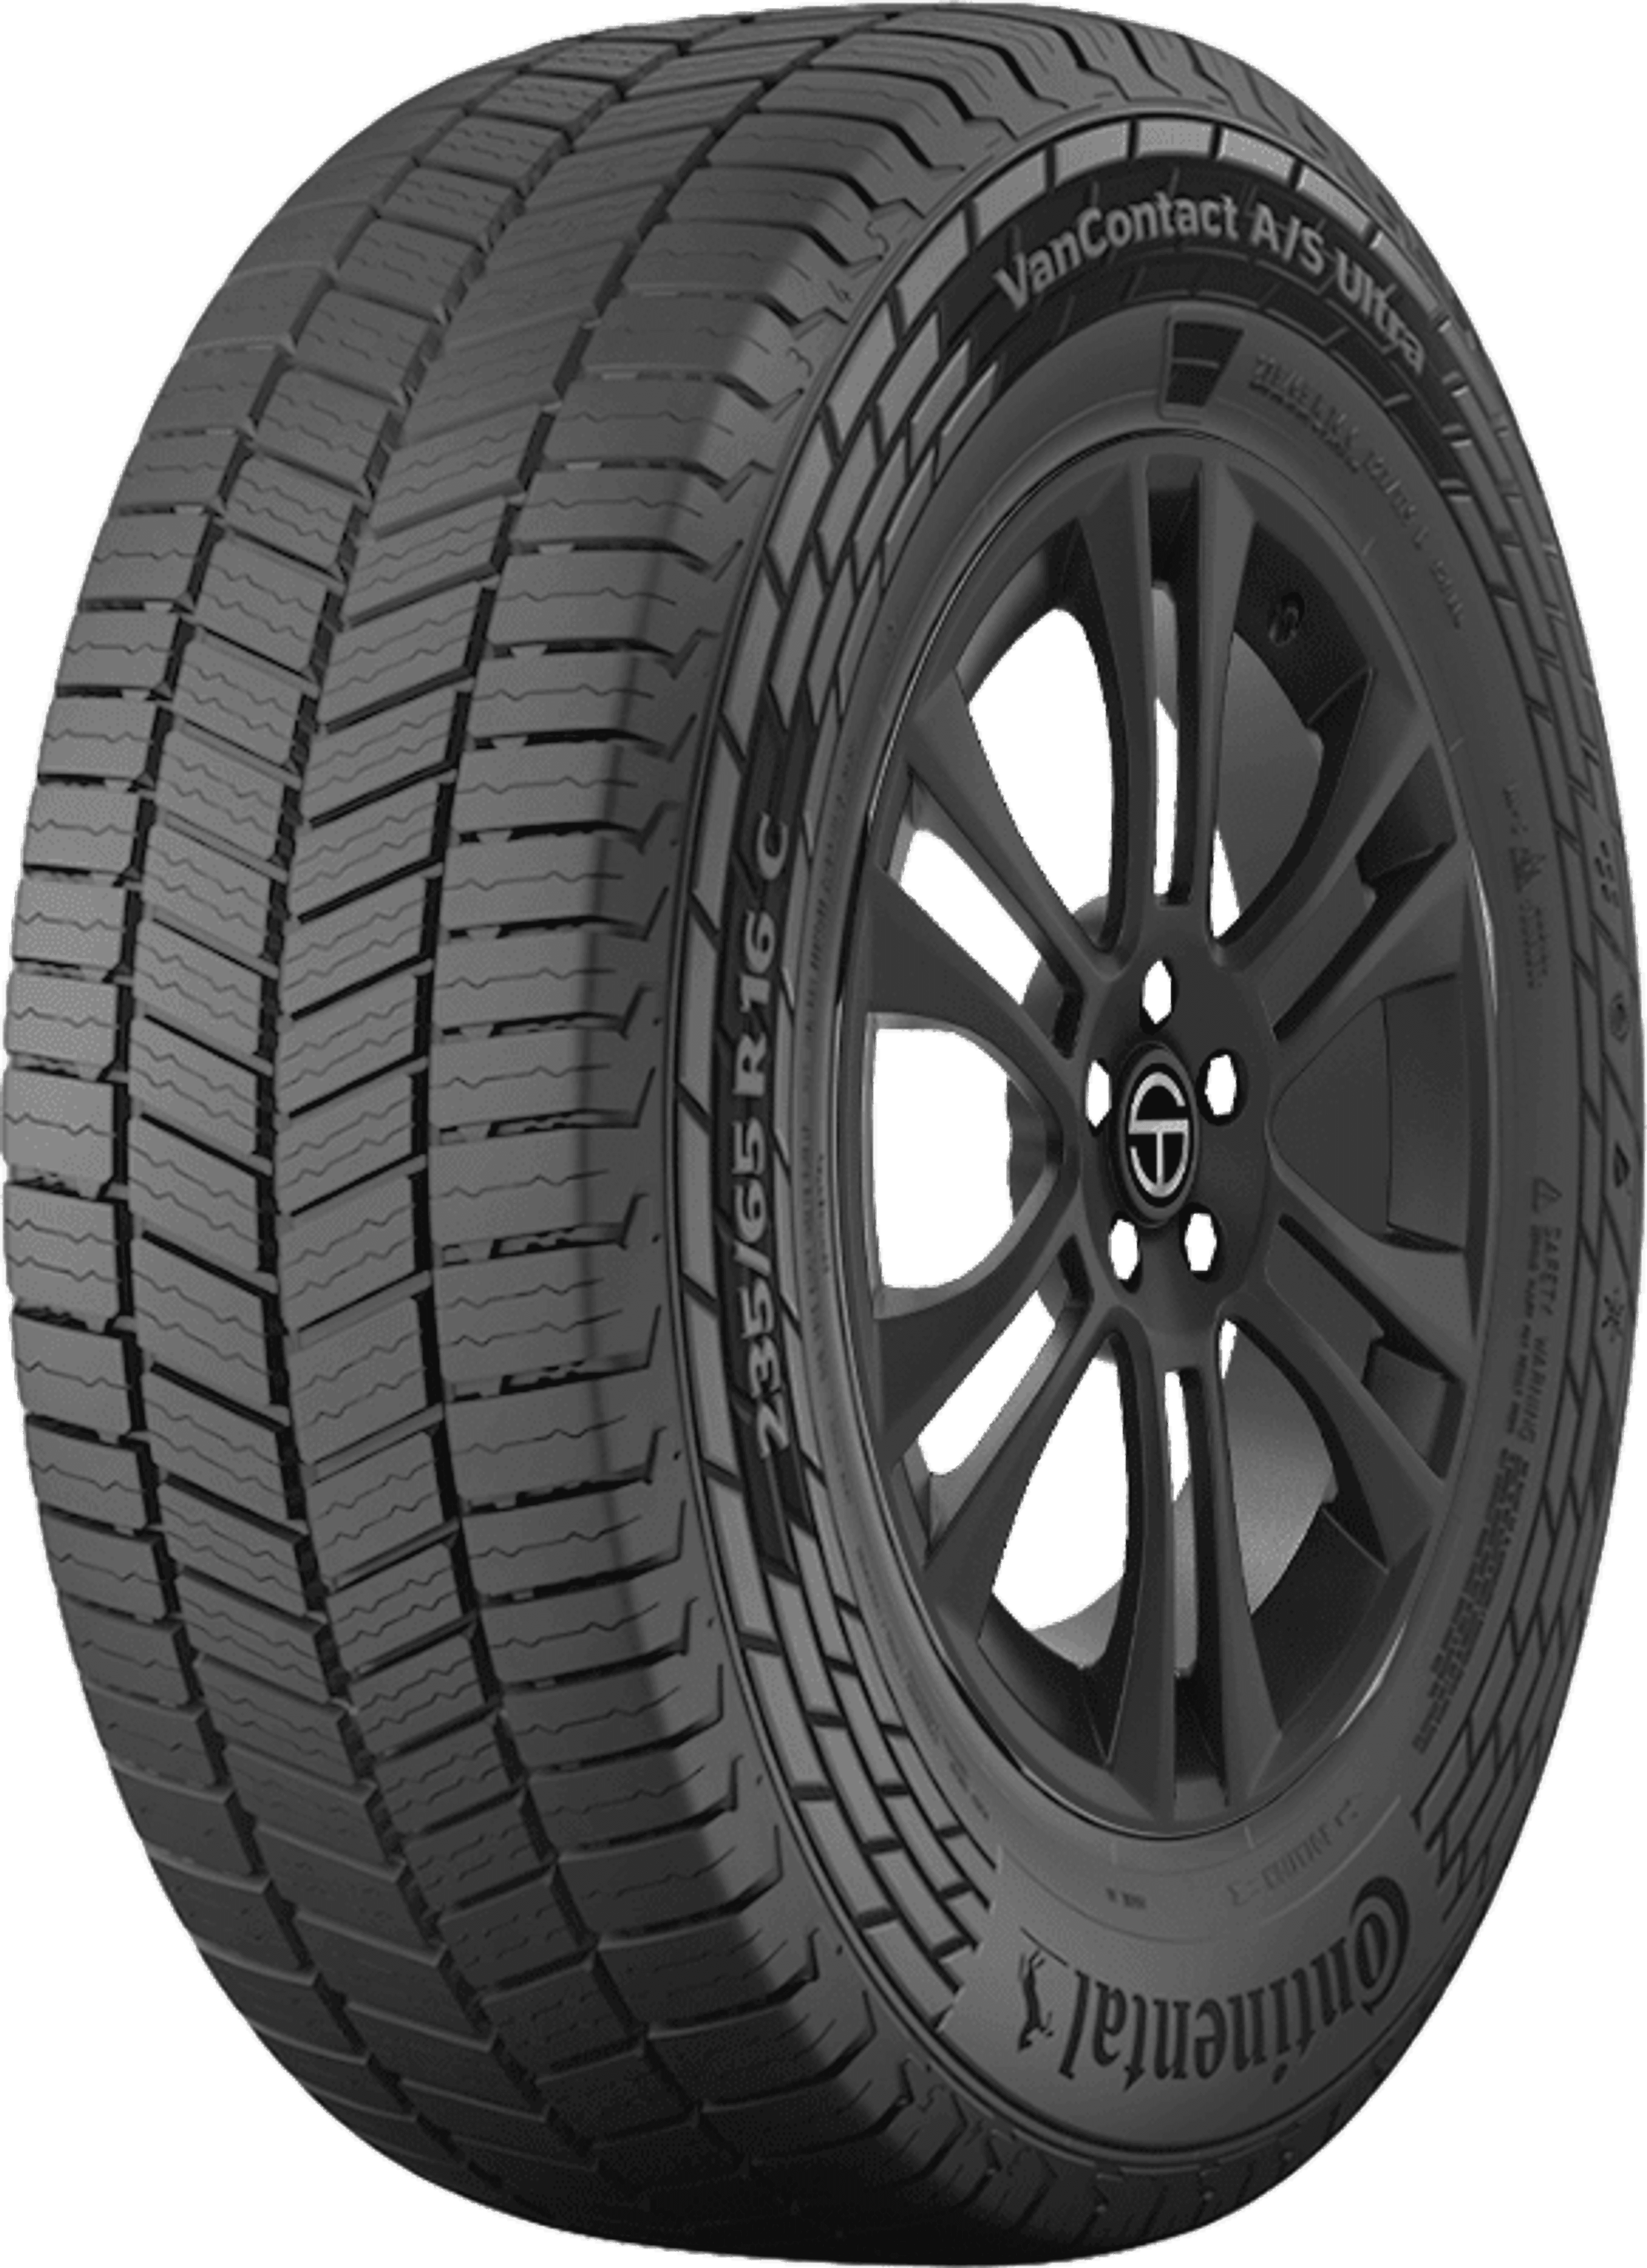 Buy Continental Ultra SimpleTire A/S Vancontact | Tires Online